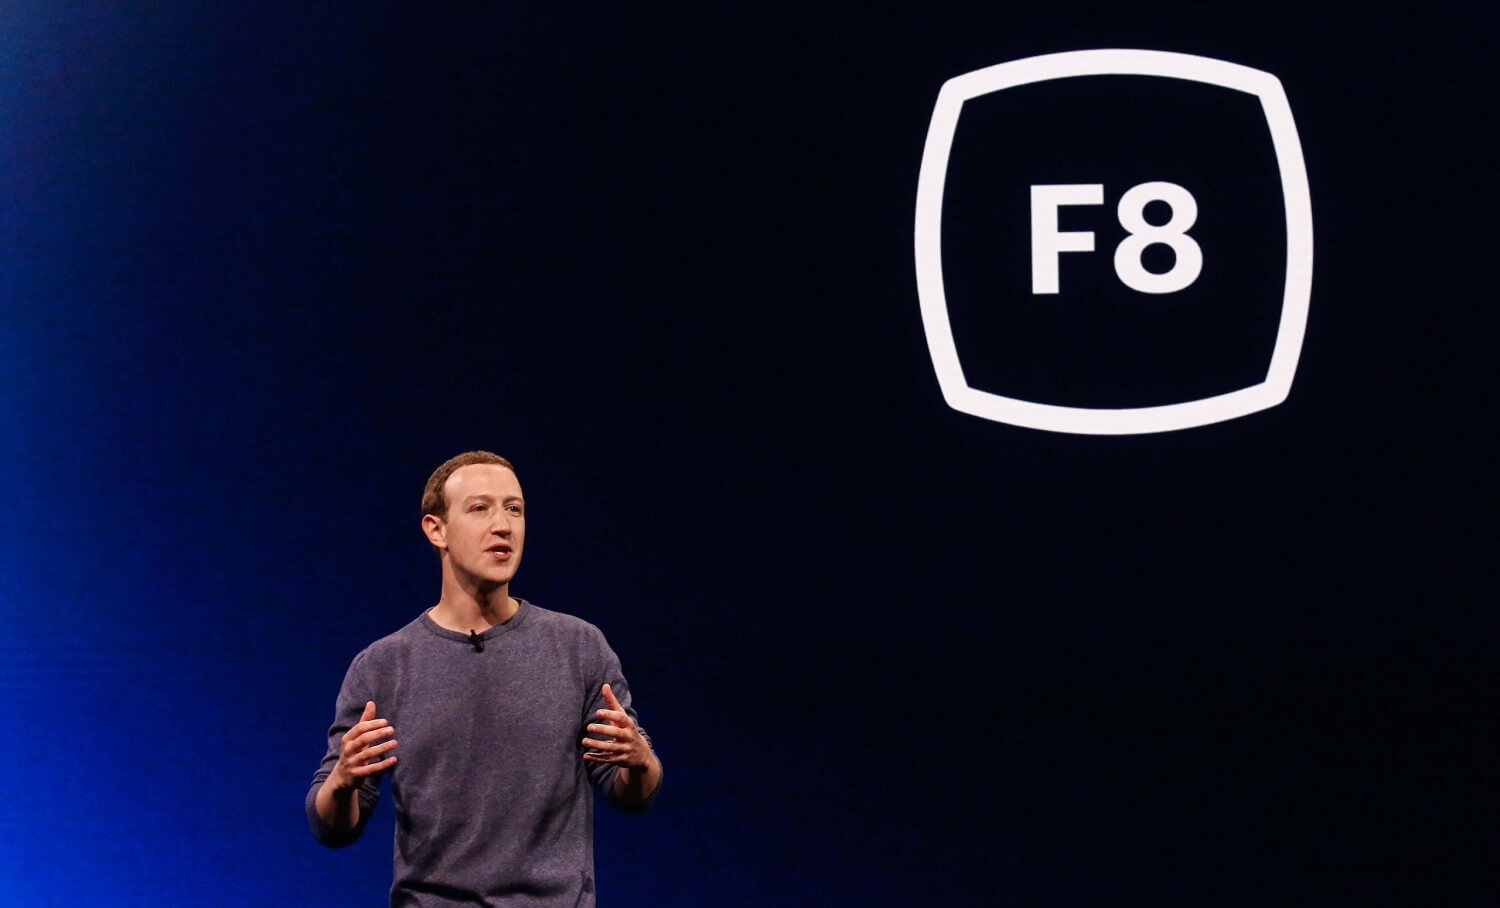 Facebook officially cancels its annual congress of F8 developers